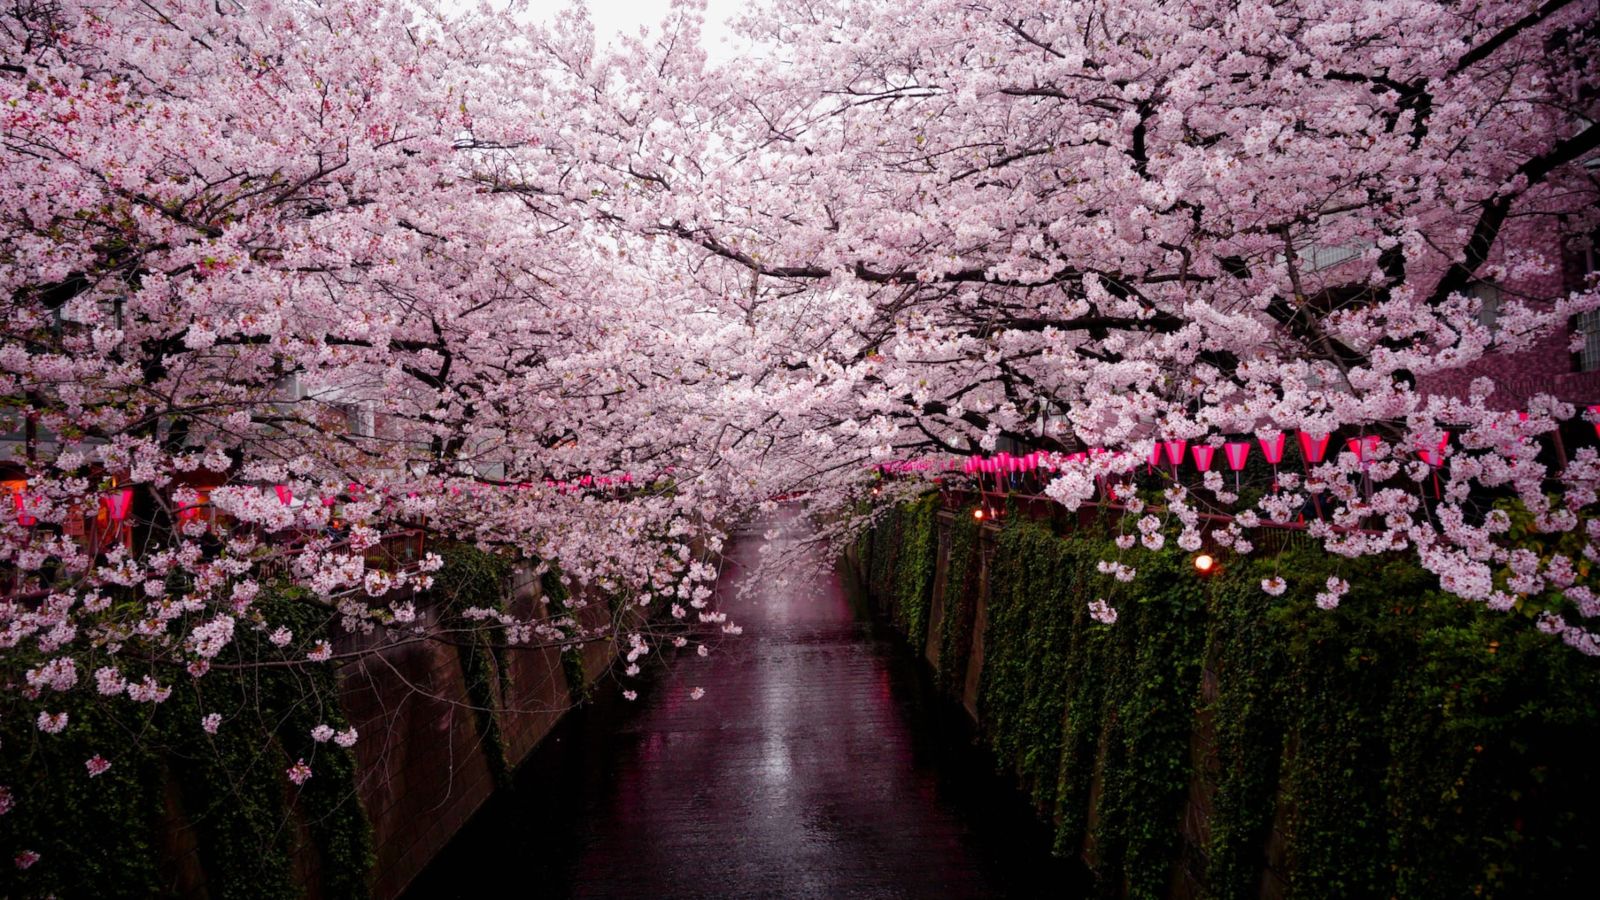 Cherry blossoms in Japan - Point Hacks